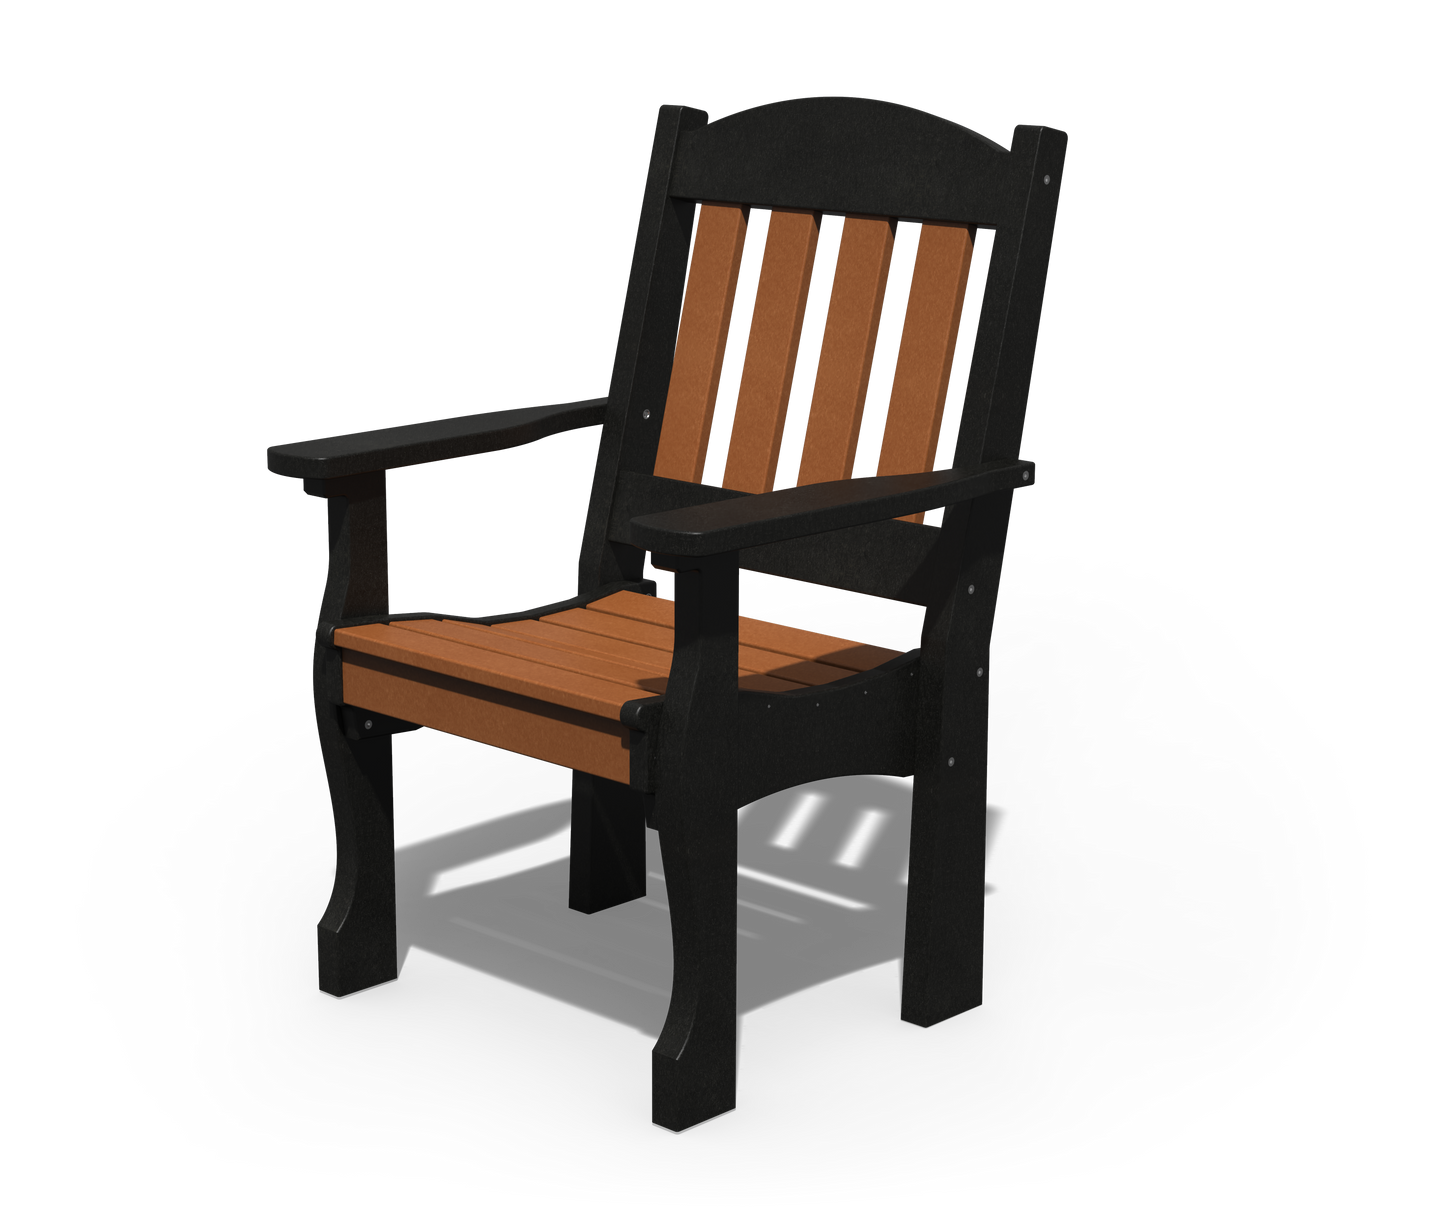 Patiova Recycled Plastic English Garden Dining Arm Chair - LEAD TIME TO SHIP 4 WEEKS